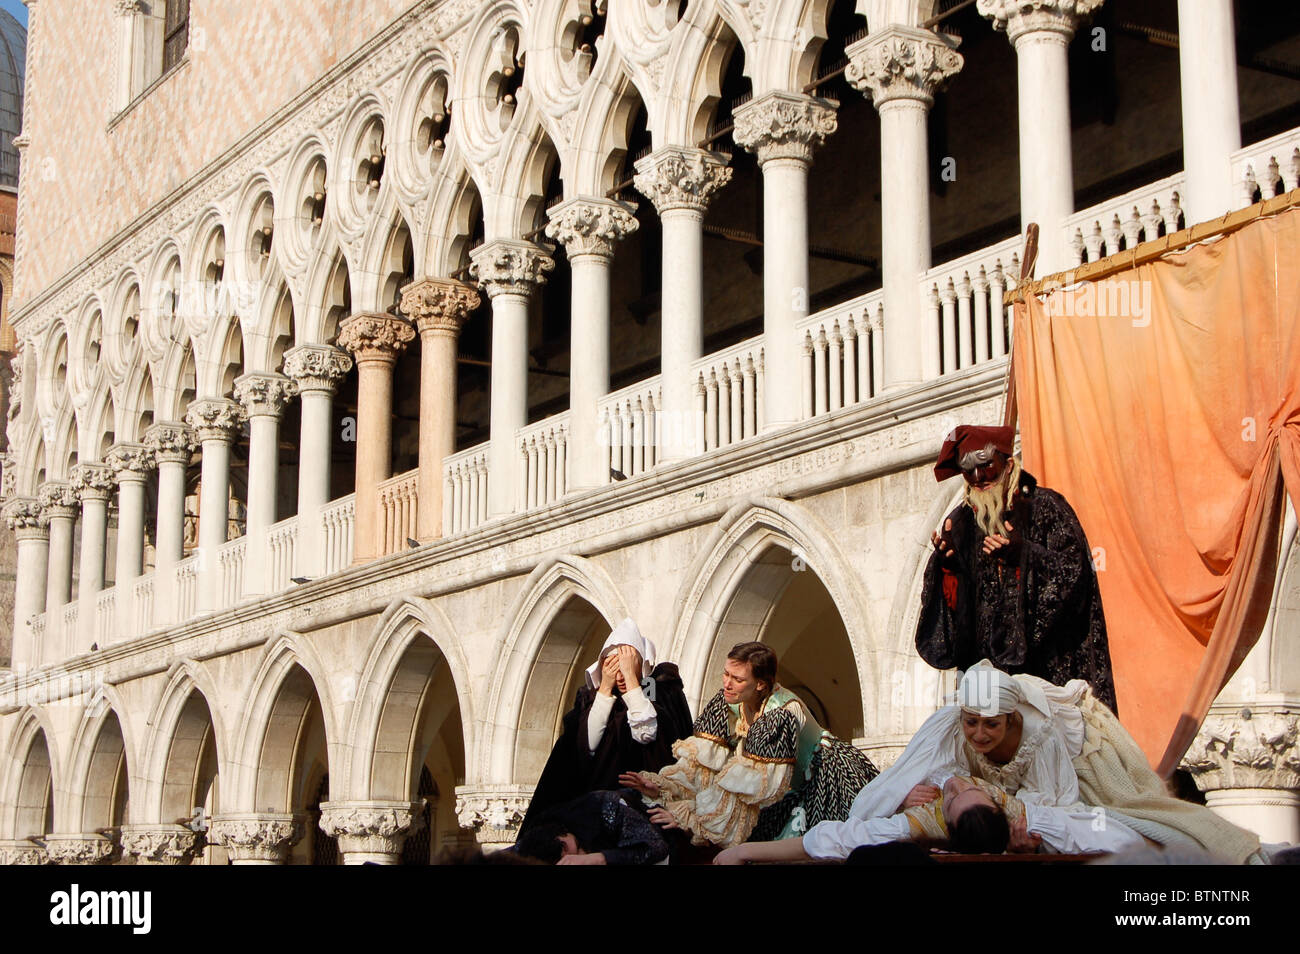 Carnival actors perform a scene from a tragedy in St Mark's / San Marco Square Venice Italy Stock Photo